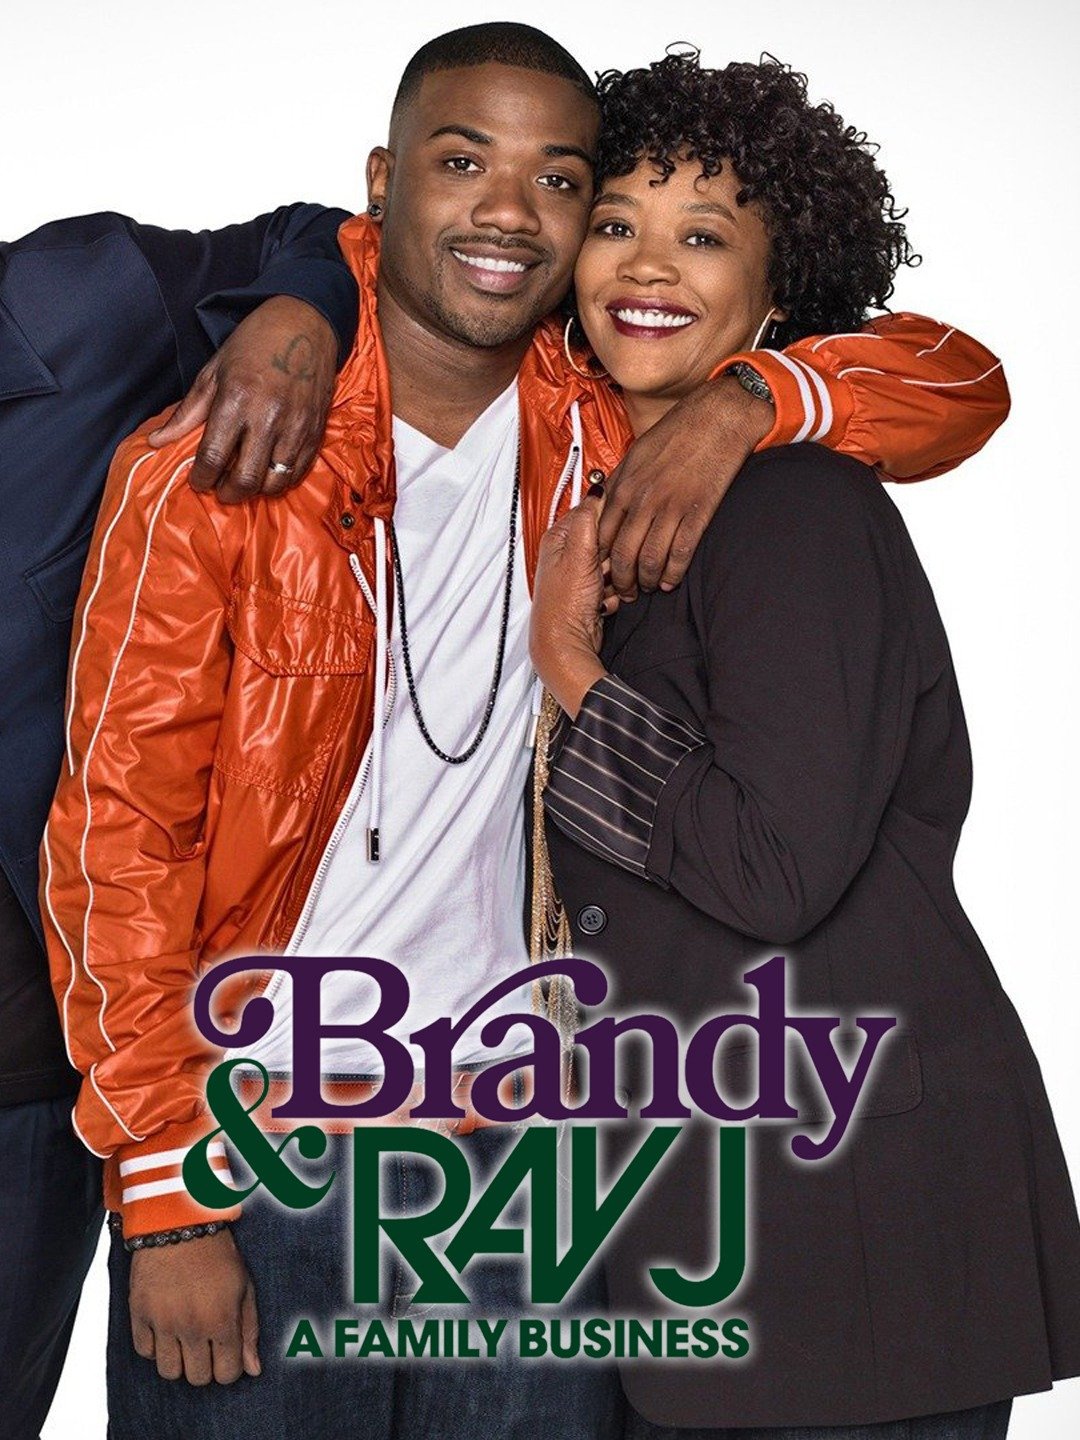 Brandy and Ray J A Family Business Season 2, Episode 6 pic